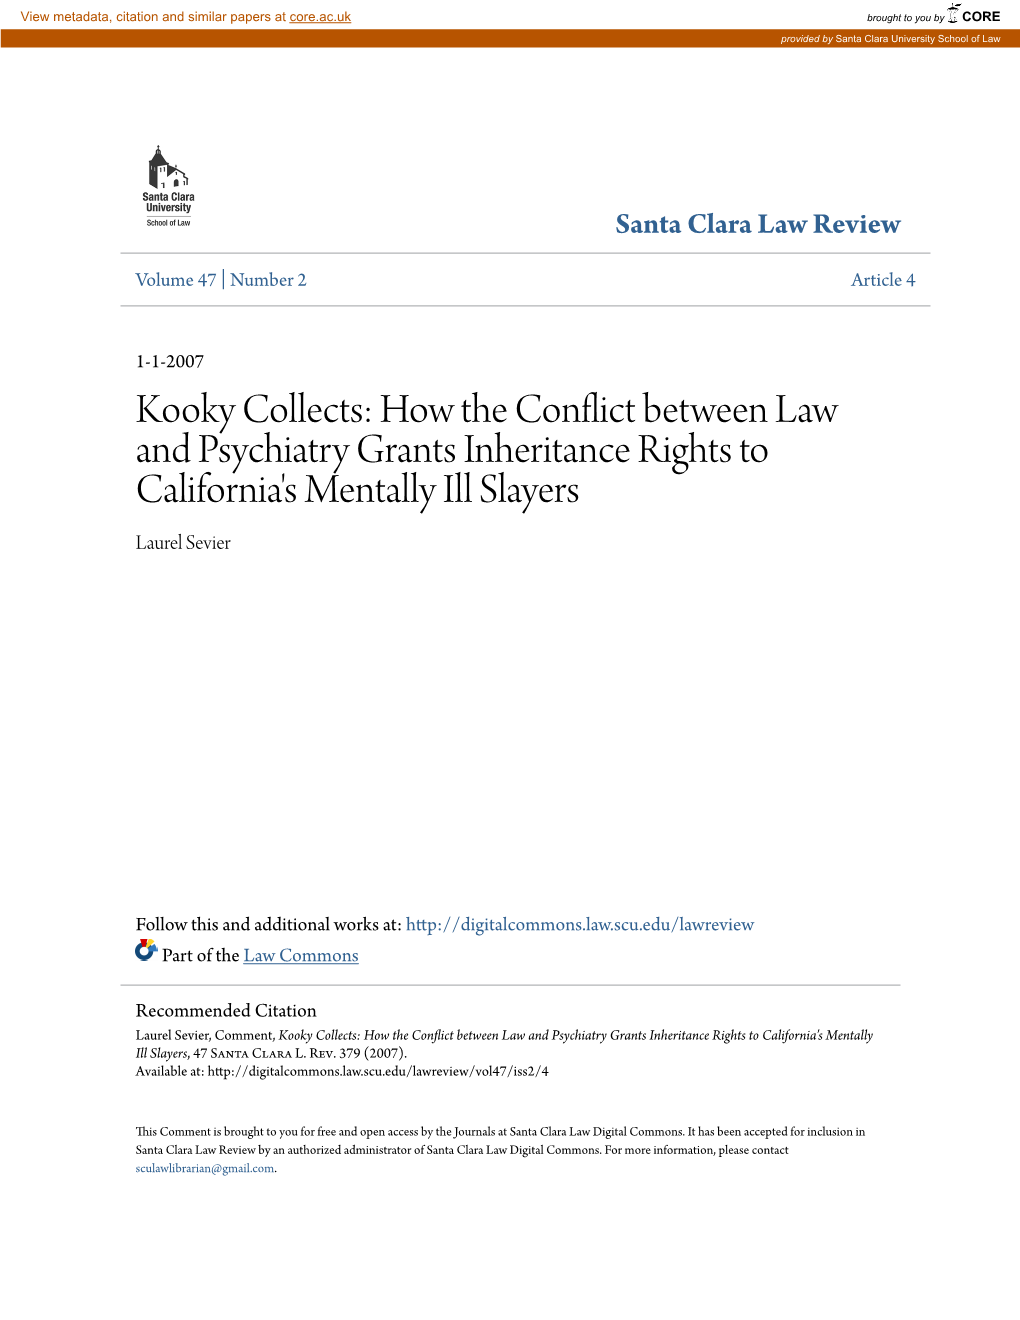 How the Conflict Between Law and Psychiatry Grants Inheritance Rights to California's Mentally Ill Slayers Laurel Sevier